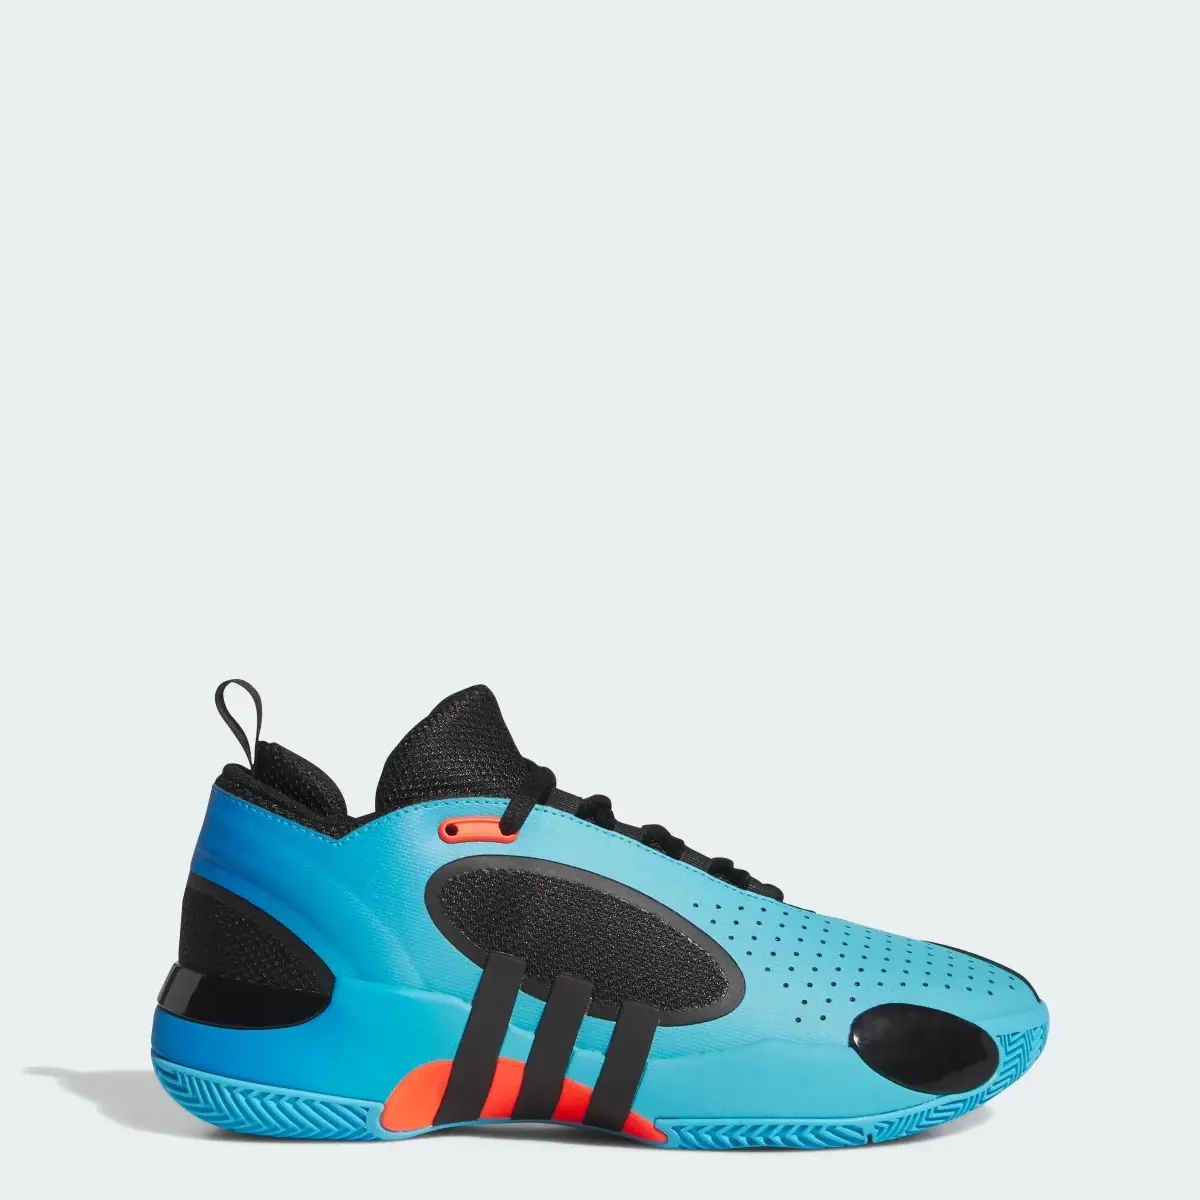 Adidas D.O.N. Issue 5 Basketball Shoes. 1